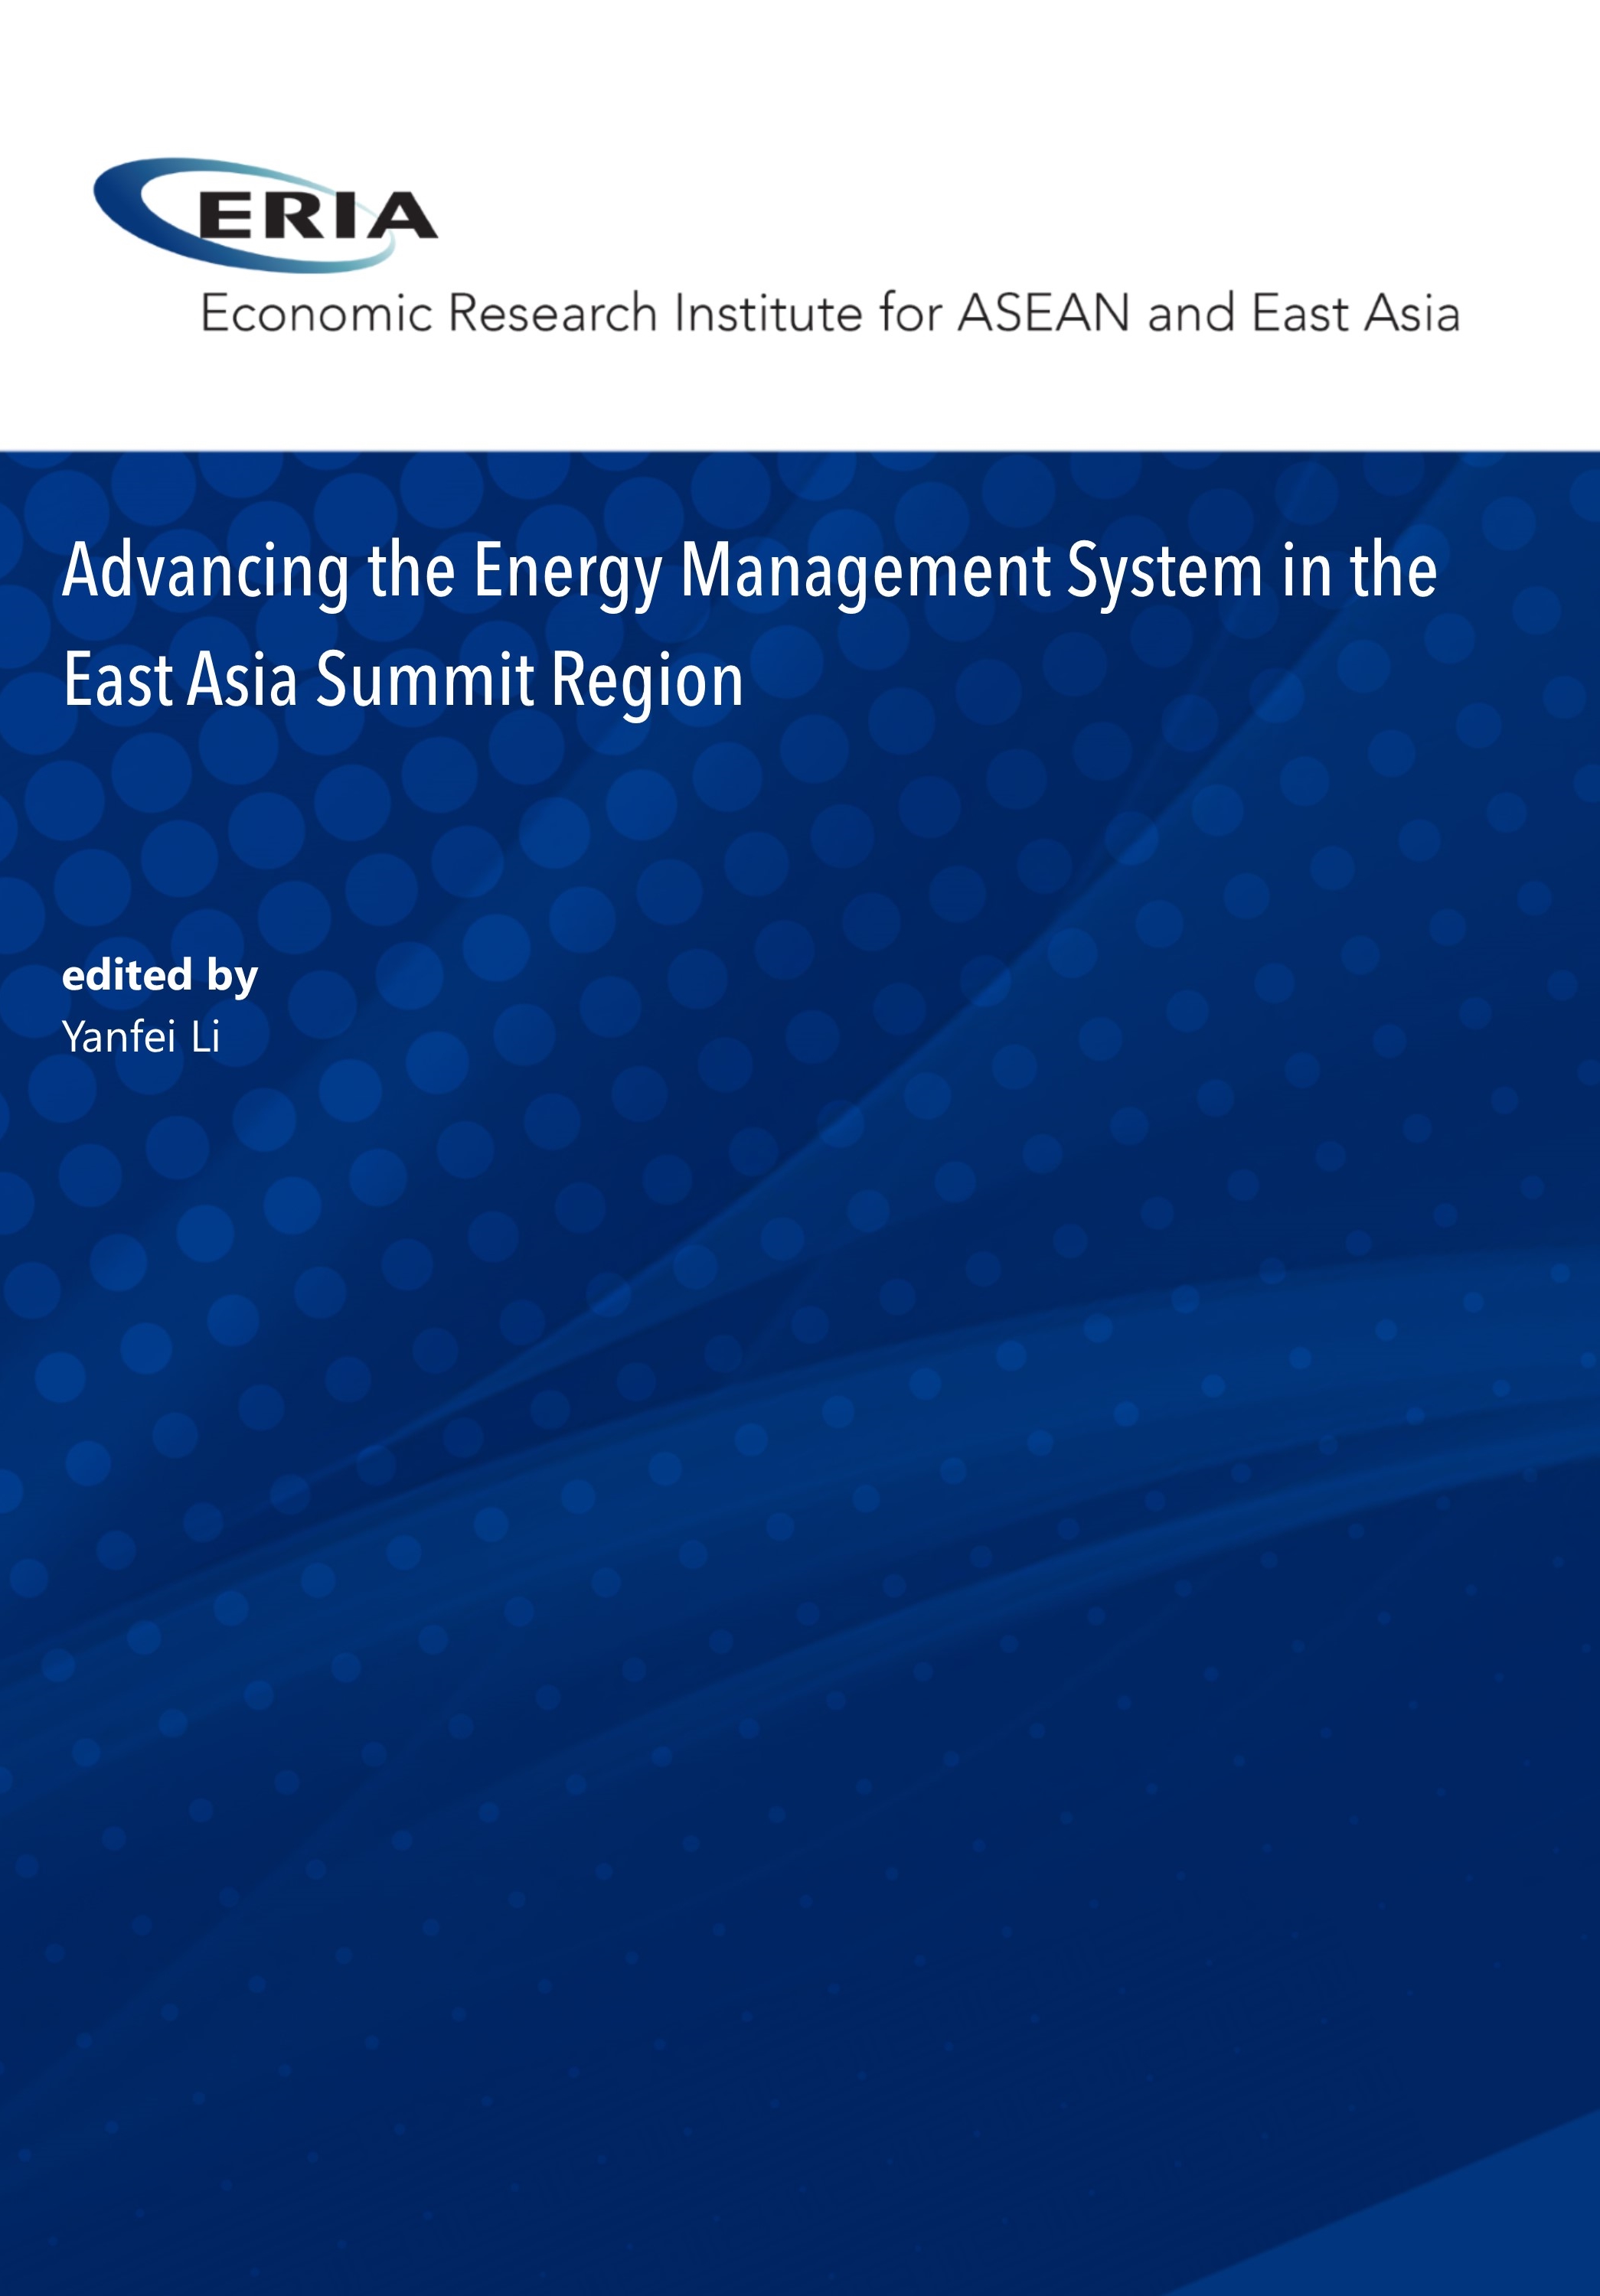 Advancing the Energy Management System in the East Asia Summit Region